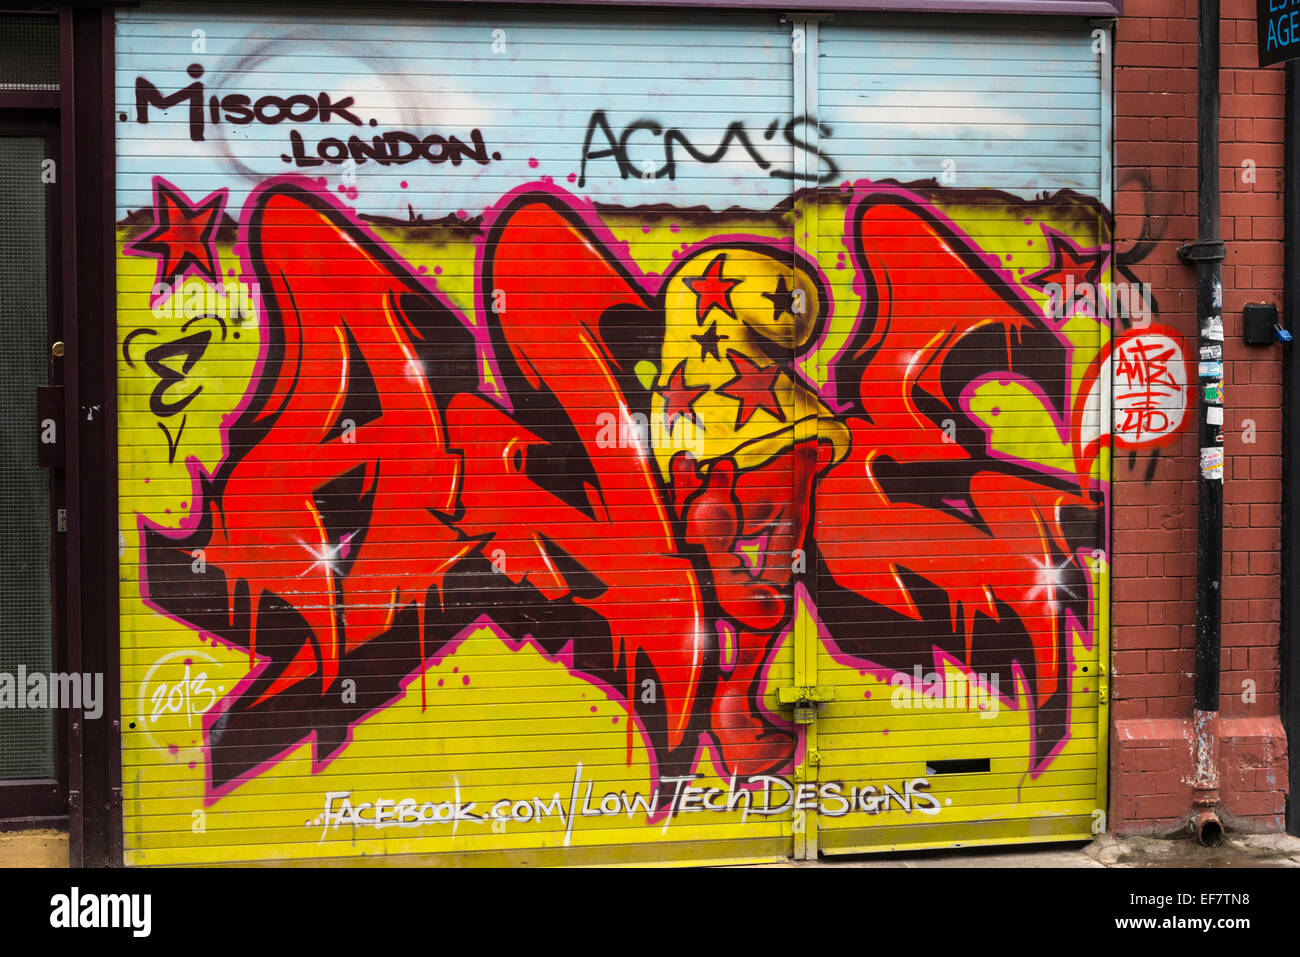 Graffiti street art in the Brick Lane area of London, England. - EDITORIAL USE ONLY Stock Photo